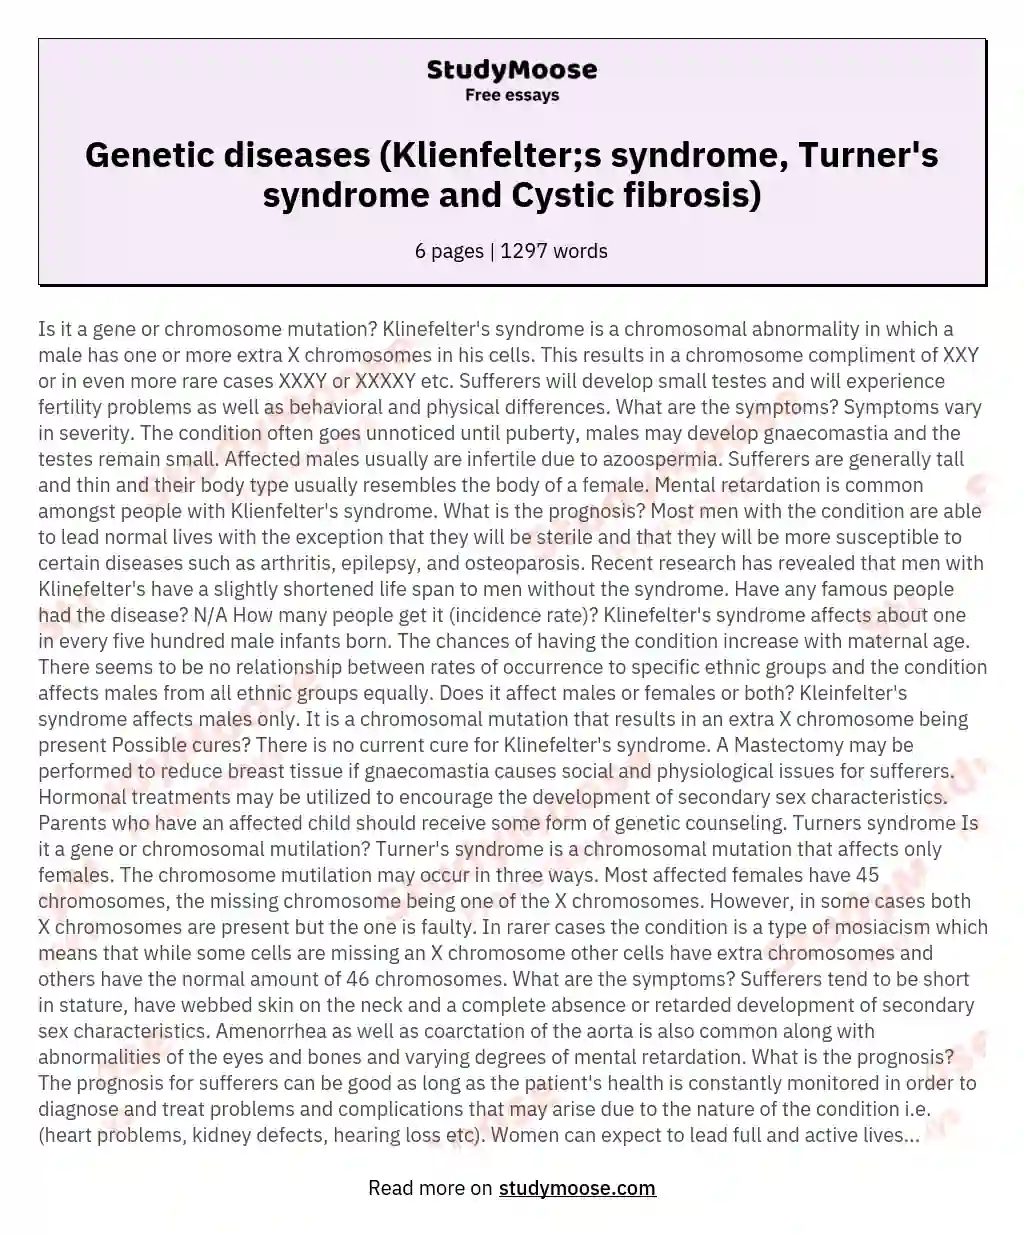 Genetic diseases (Klienfelter;s syndrome, Turner's syndrome and Cystic fibrosis) essay